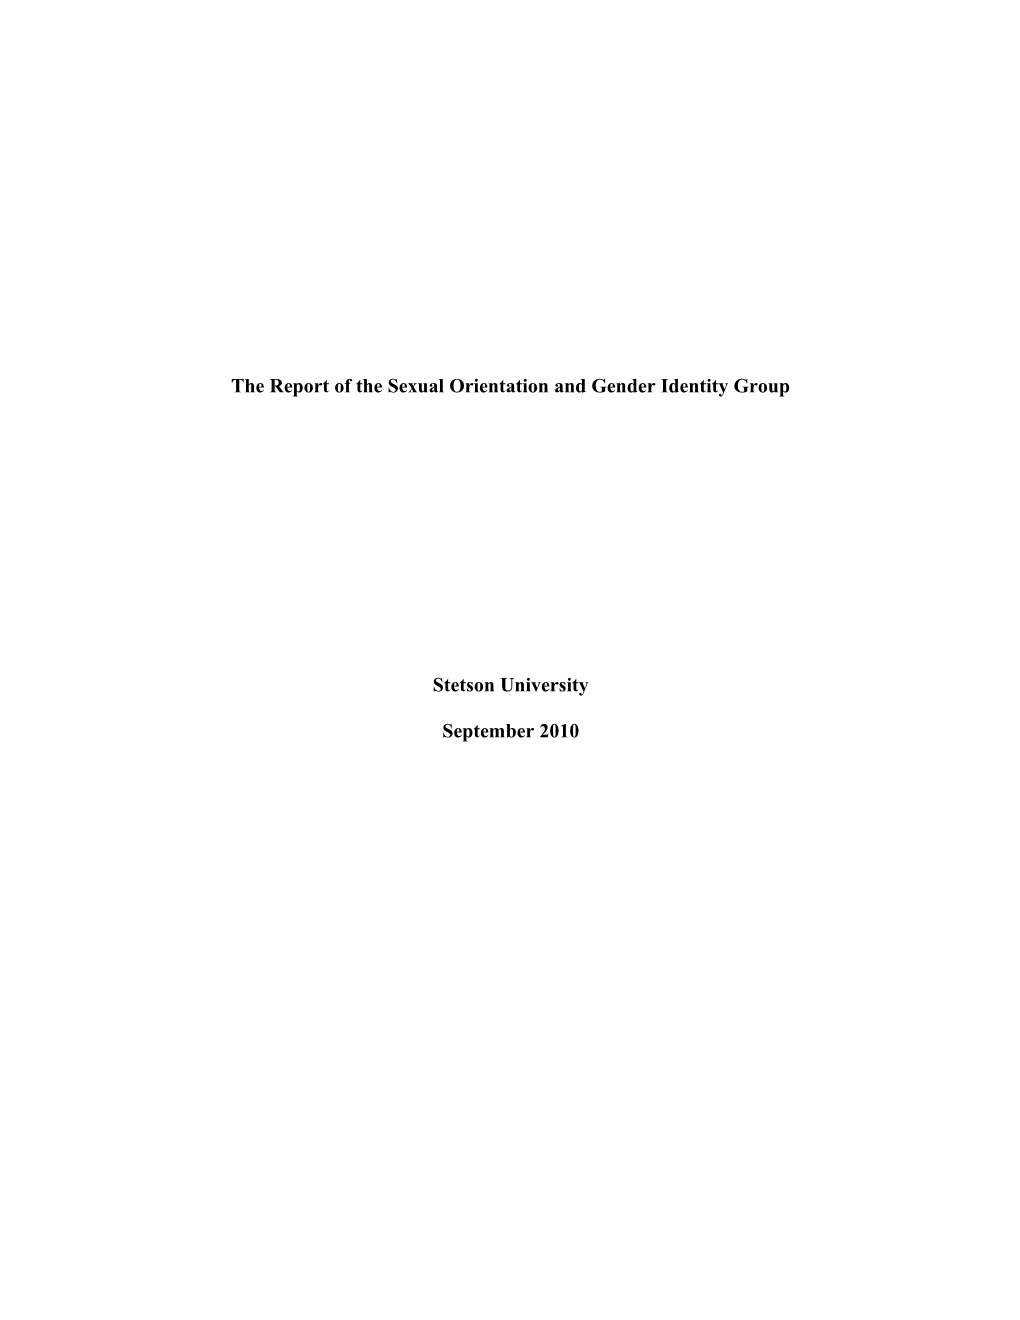 The Report of the Sexual Orientation and Gender Identity Group